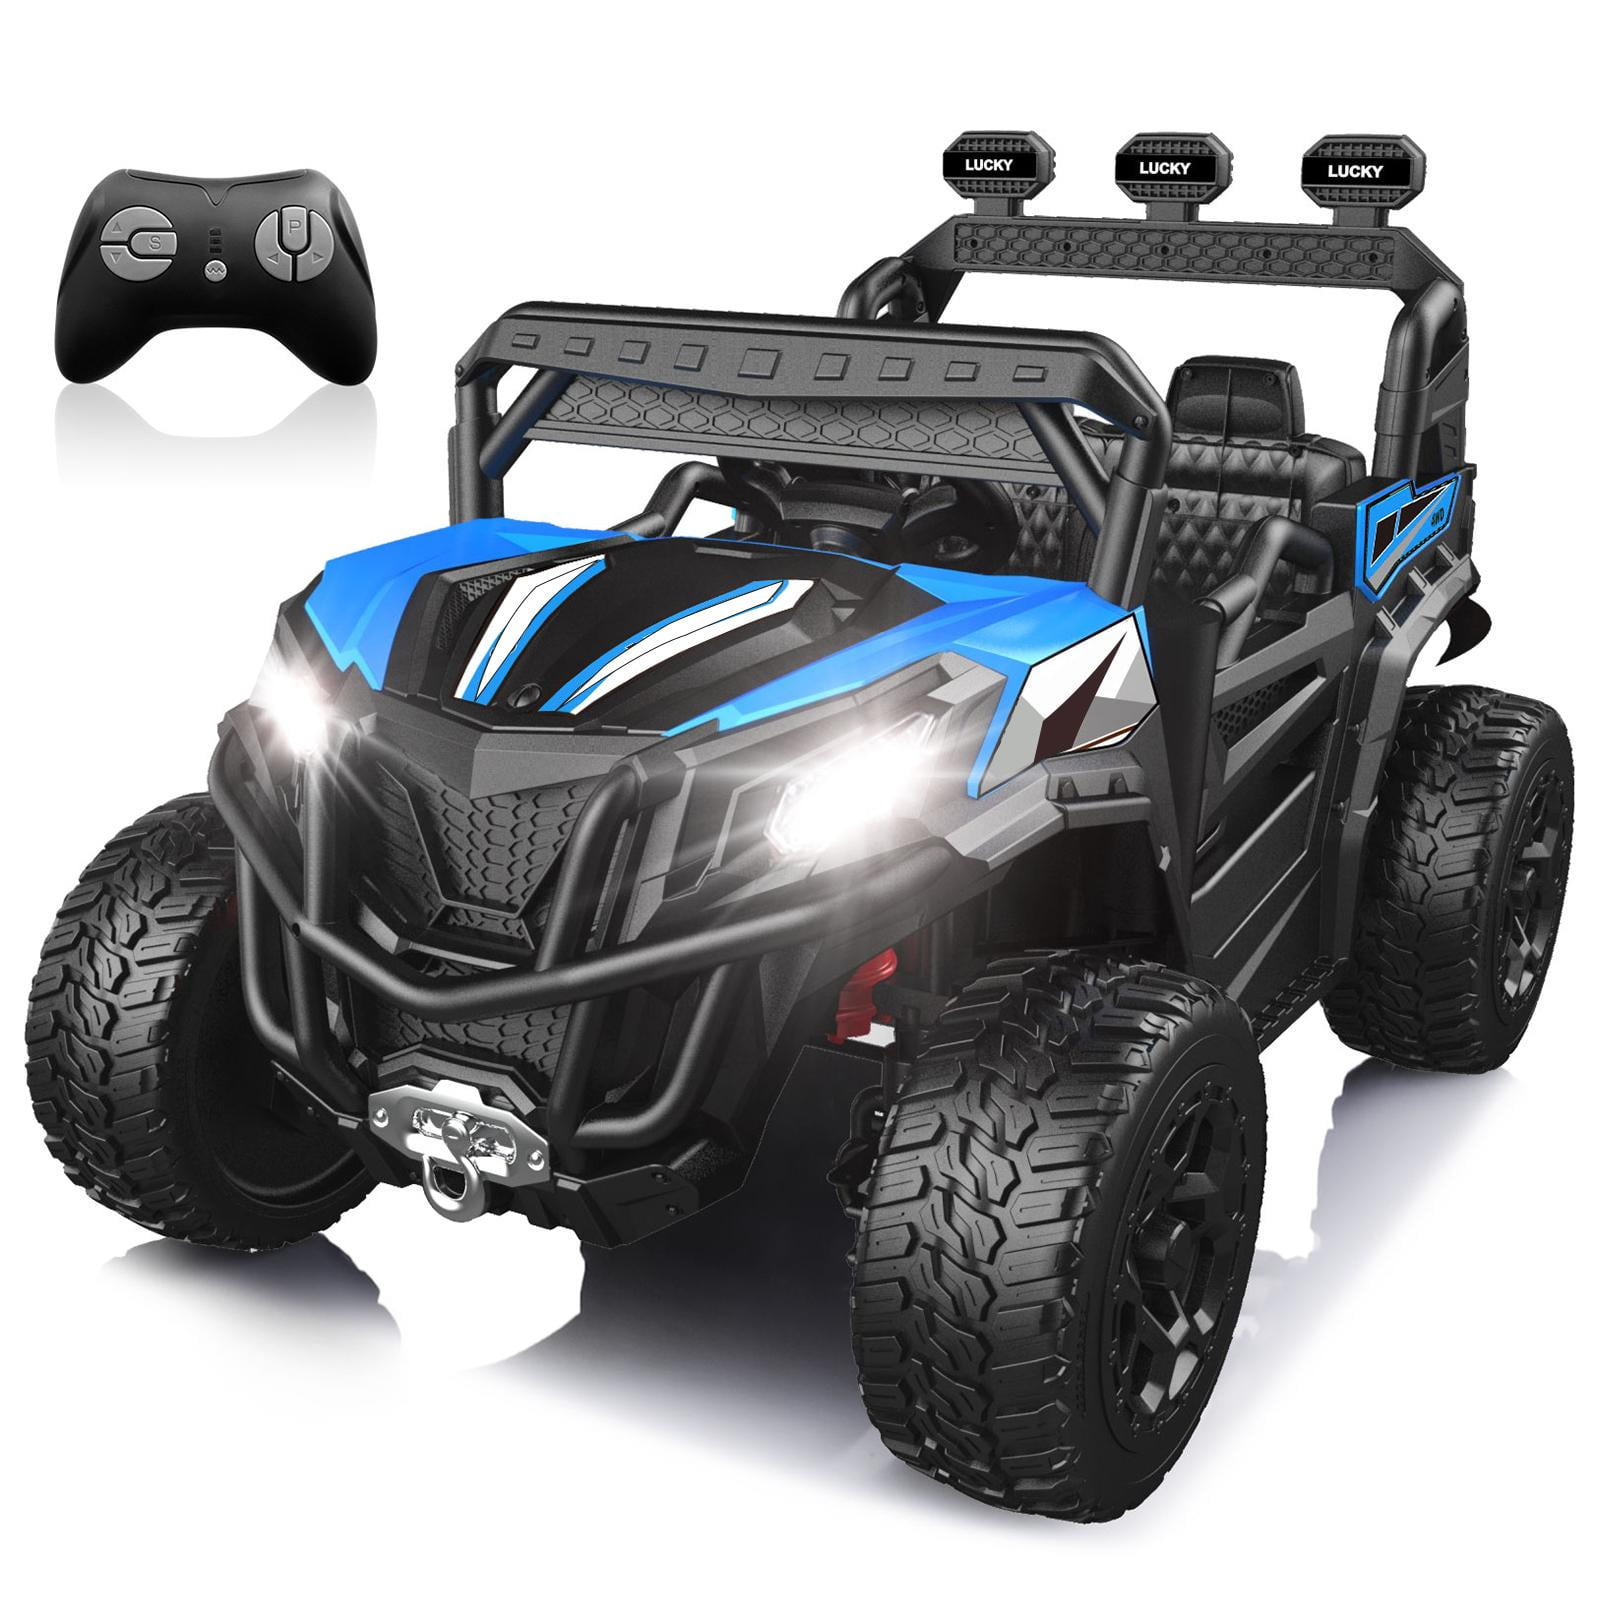 Toktoo 24v Ride On Toy 4wd Battery